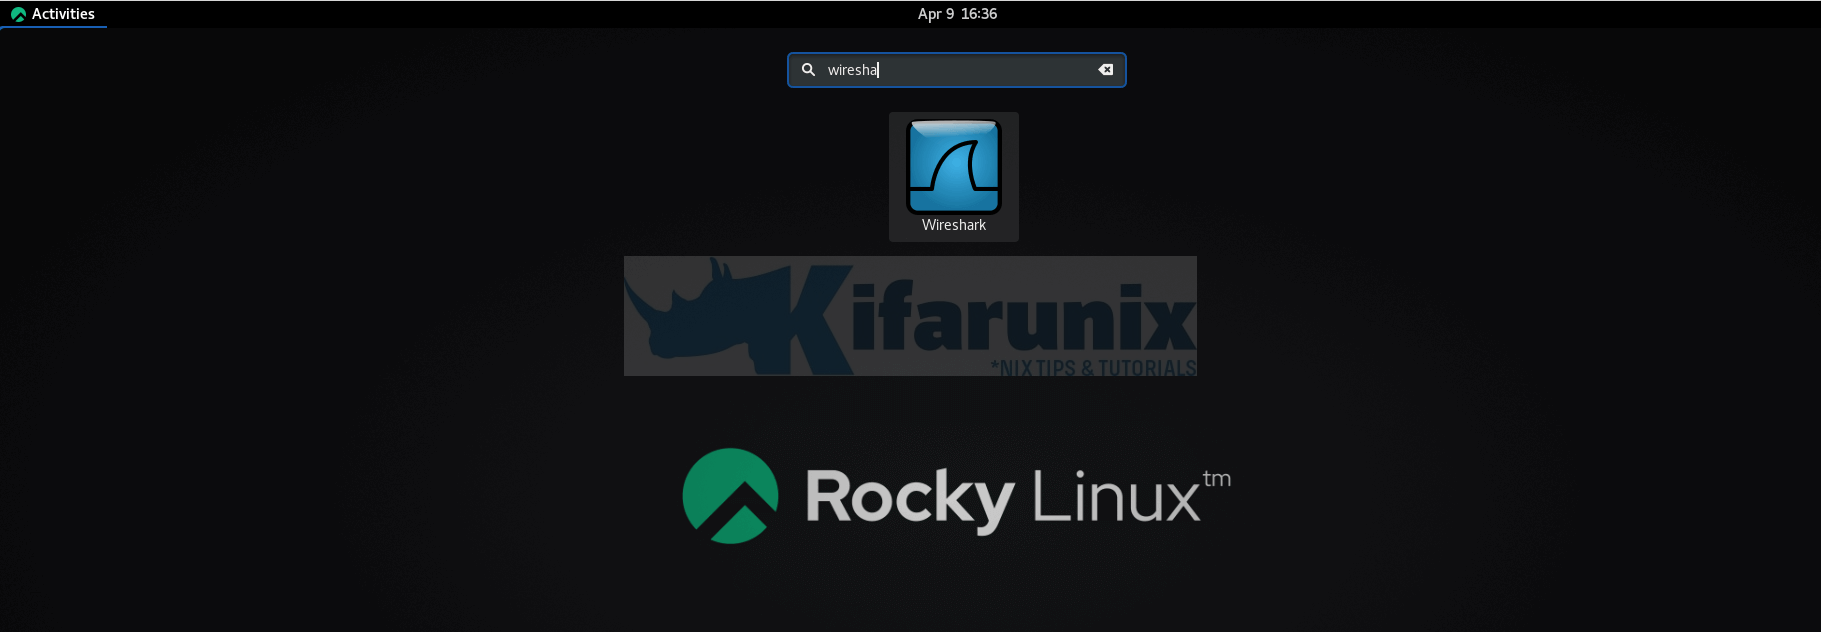 Install Wireshark on Rocky Linux